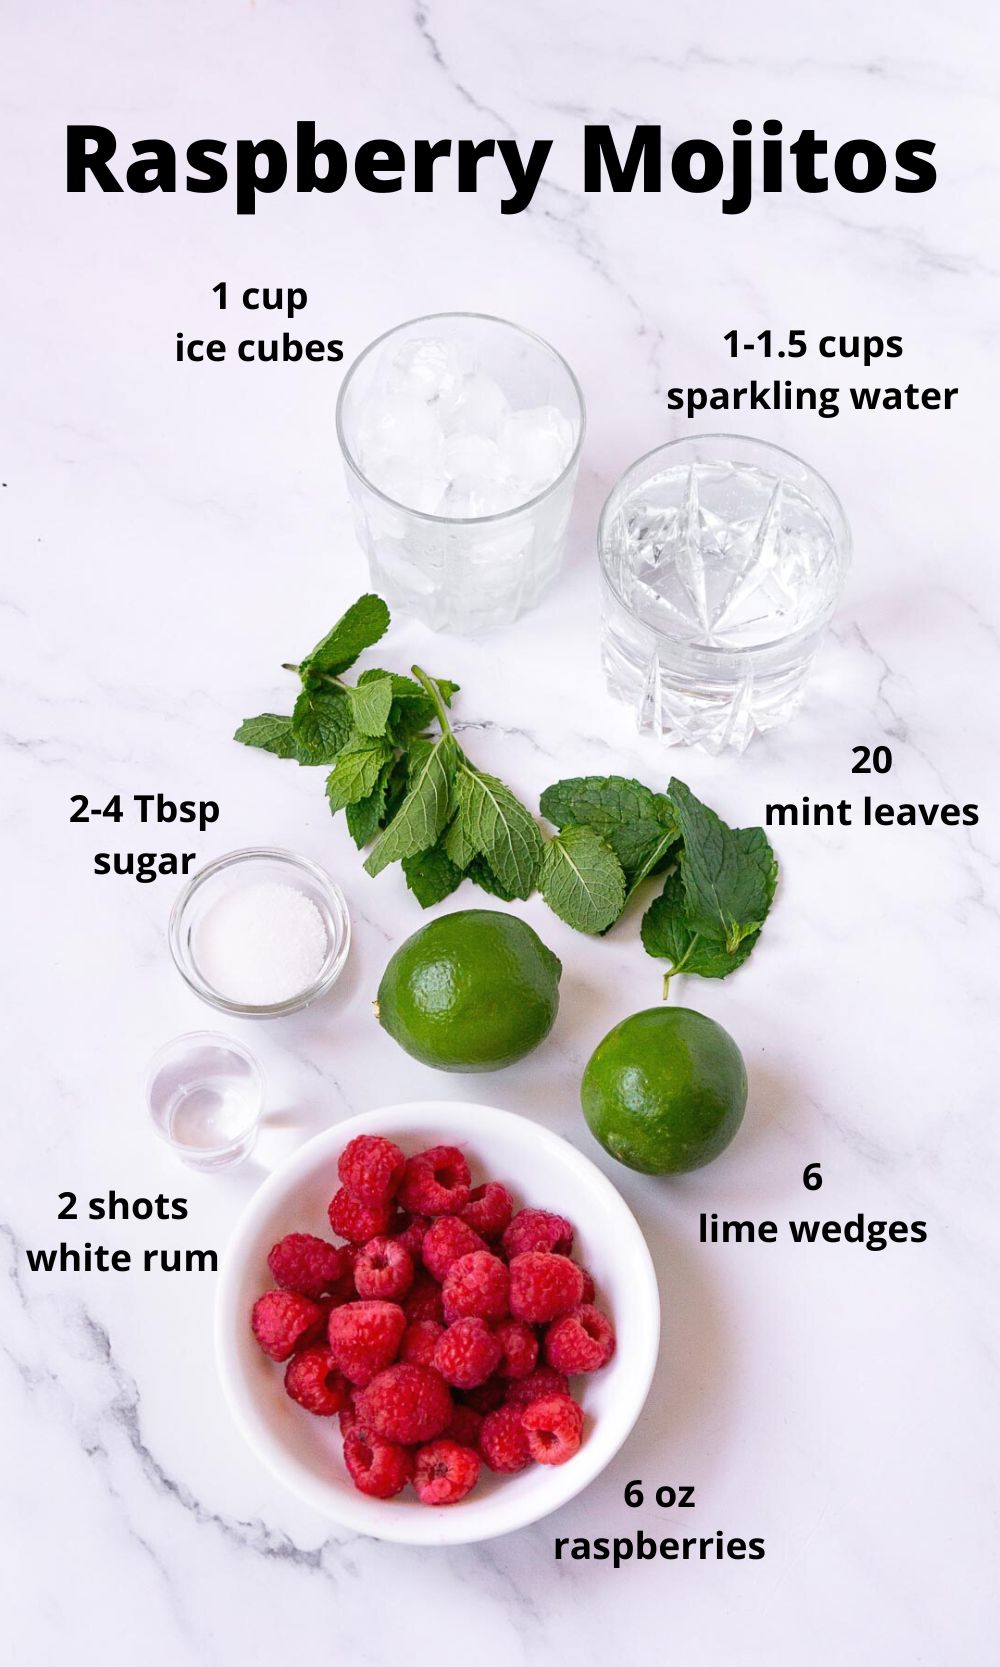 Ingredients for raspberry mojito